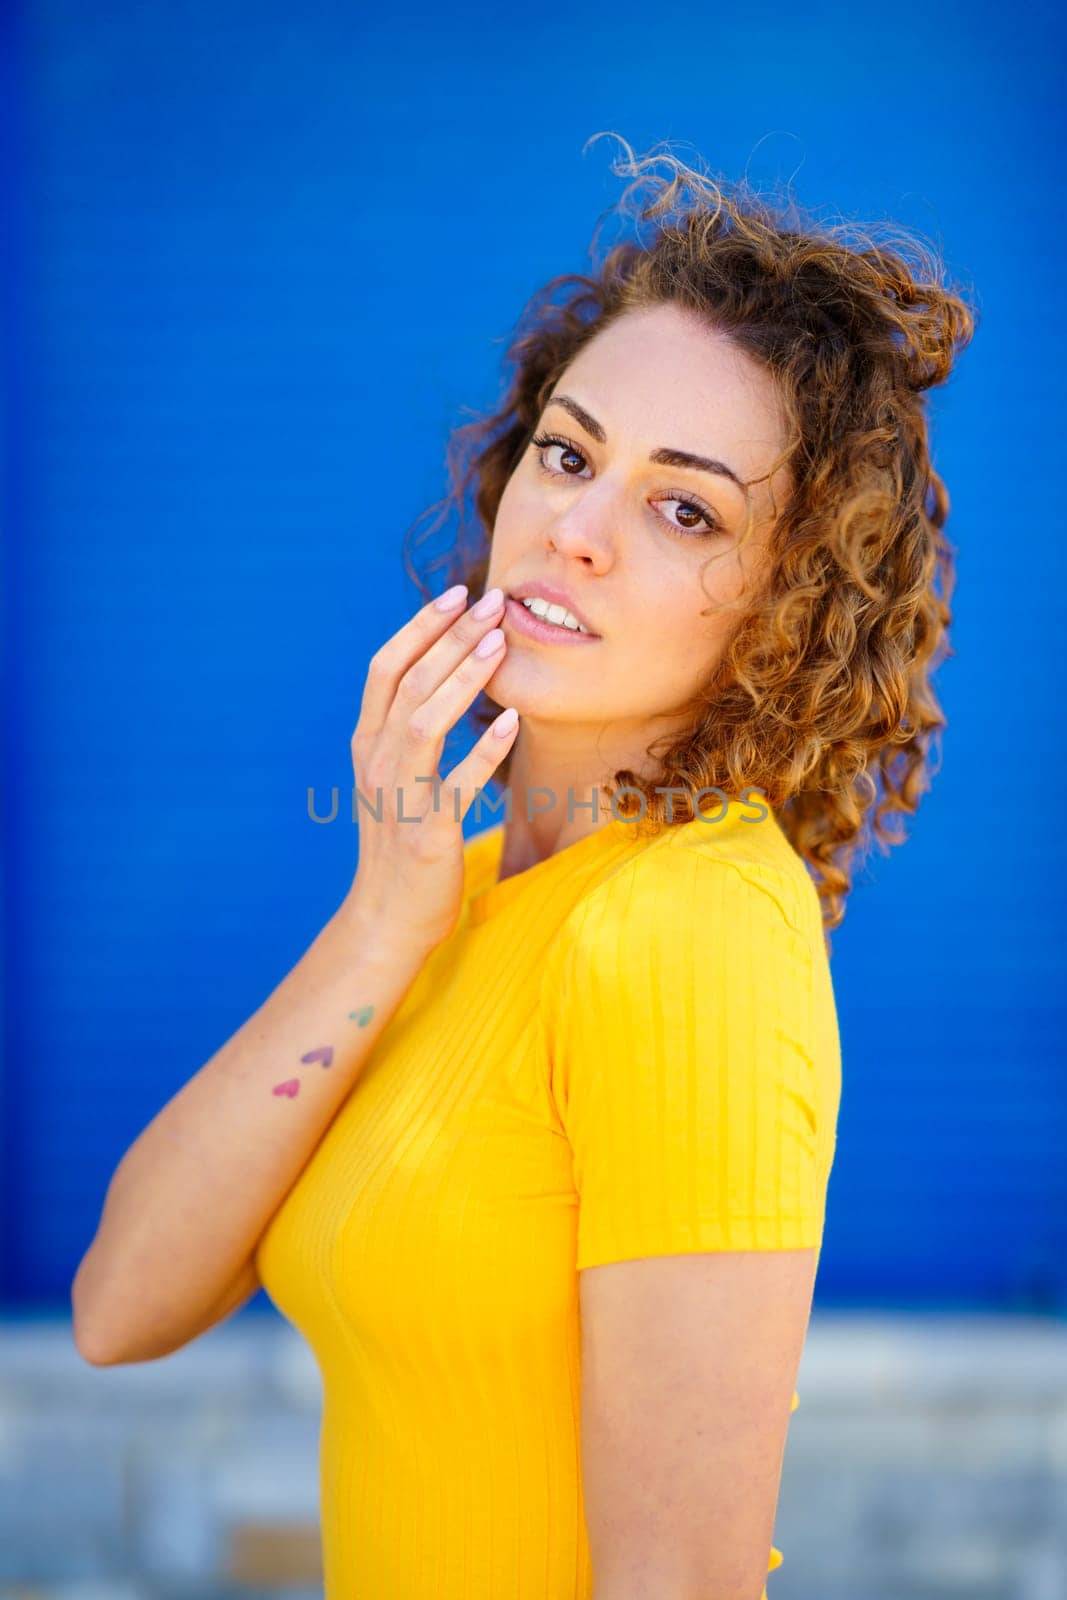 Charming young female in yellow t shirt with curly brown hair looking at camera and touching lips against blue background on blurred city street